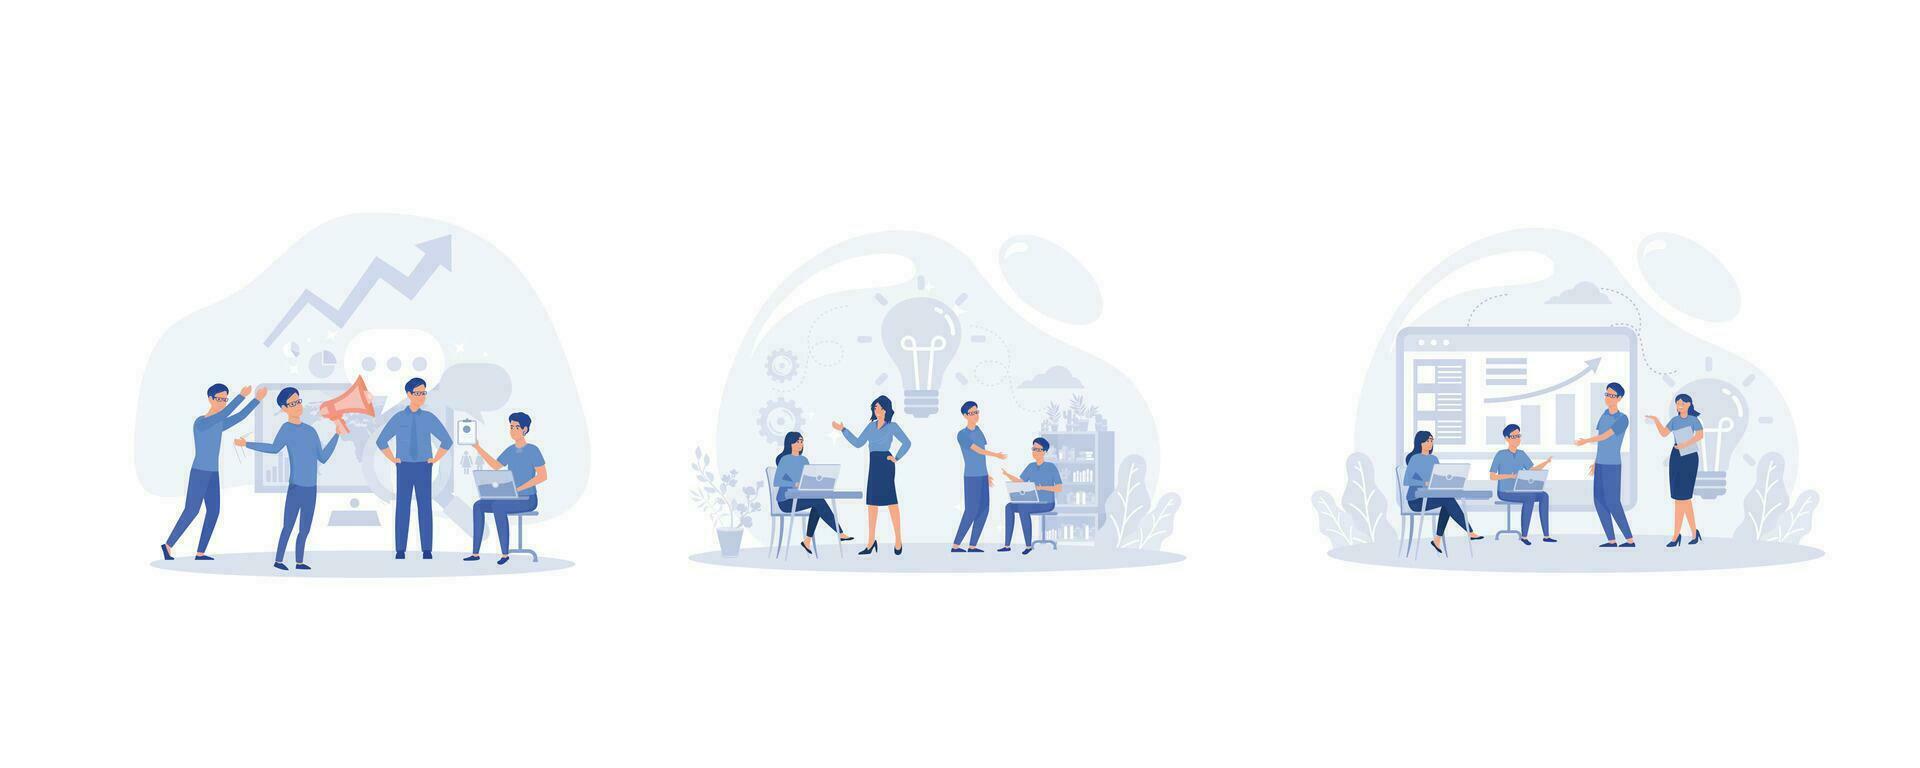 People workers cartoon characters searching for new ideas, working together in the company, online assistant at work, set flat vector modern illustration